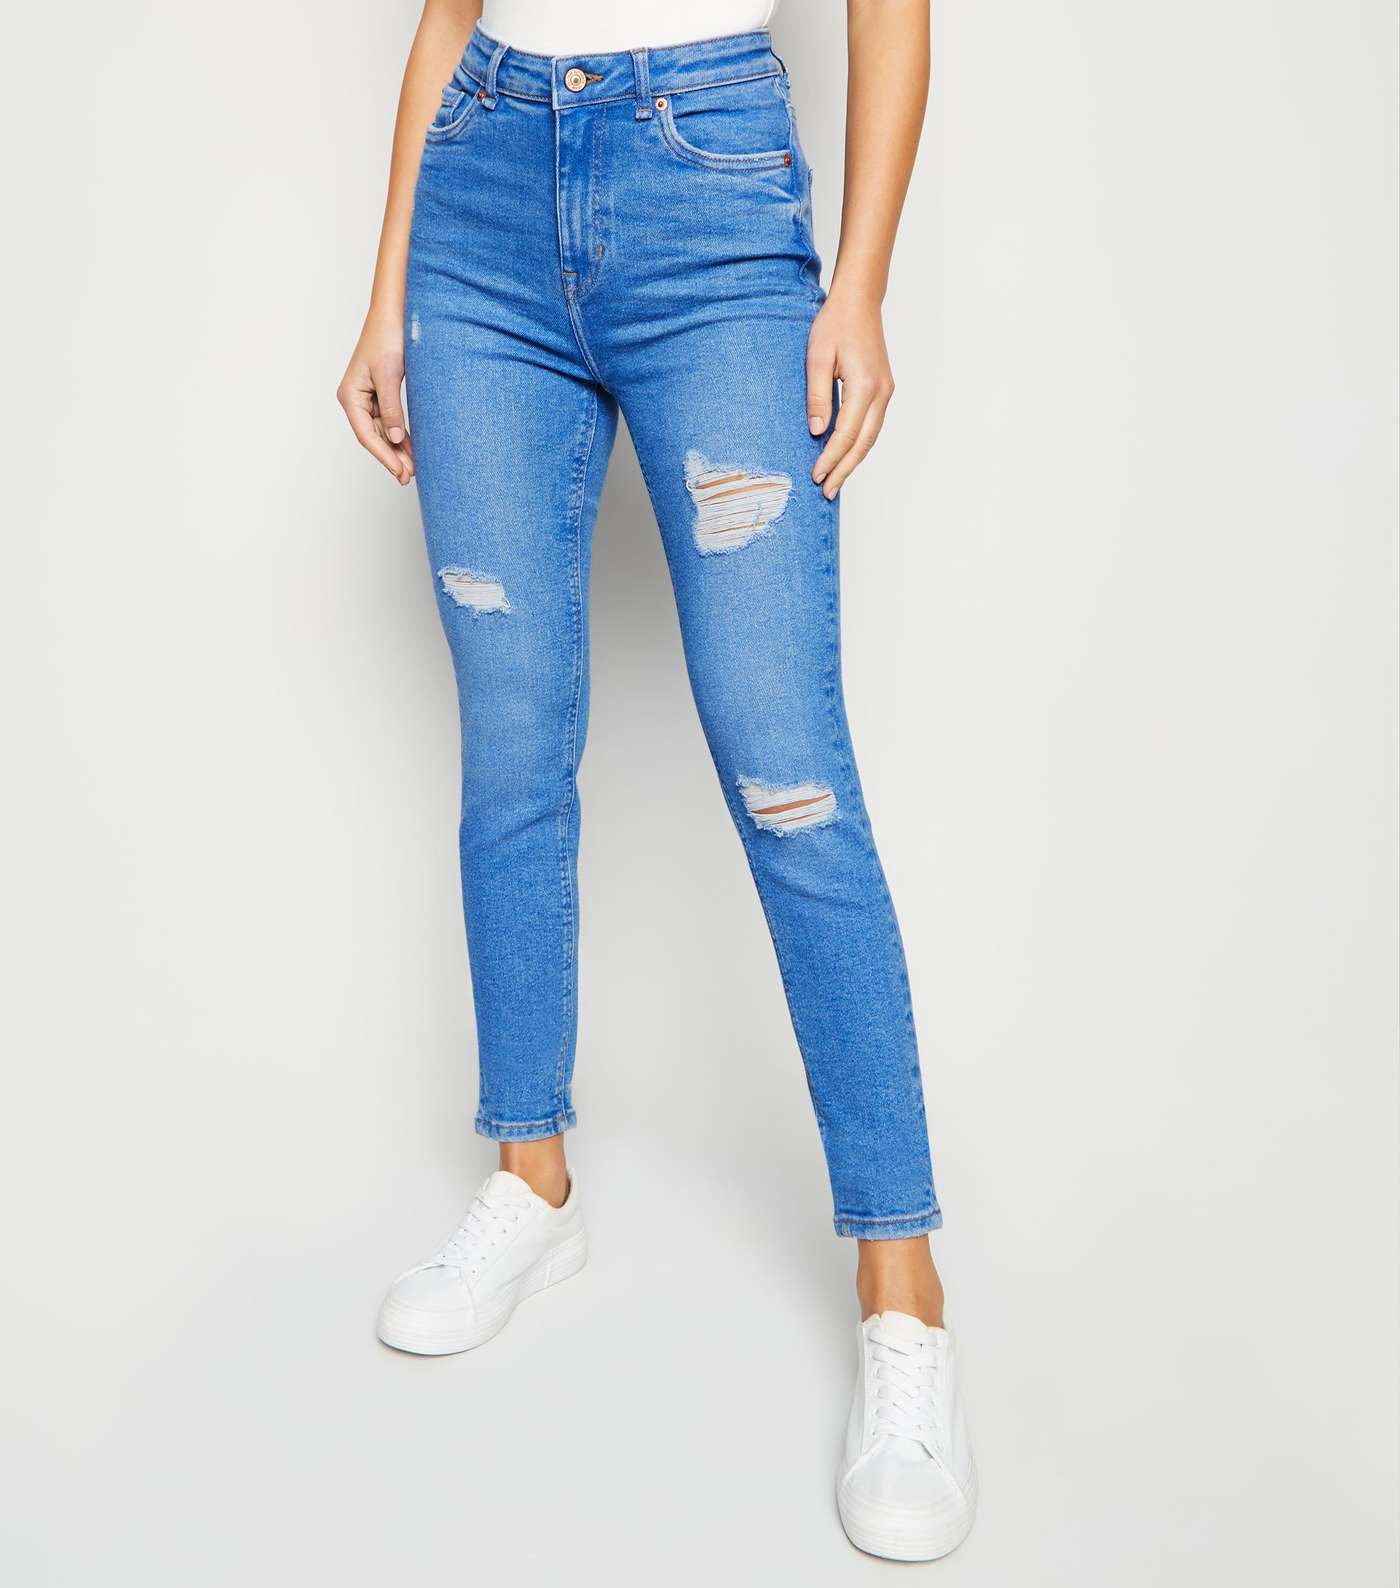 Bright Blue Ripped Super Skinny Hallie Jeans Image 2